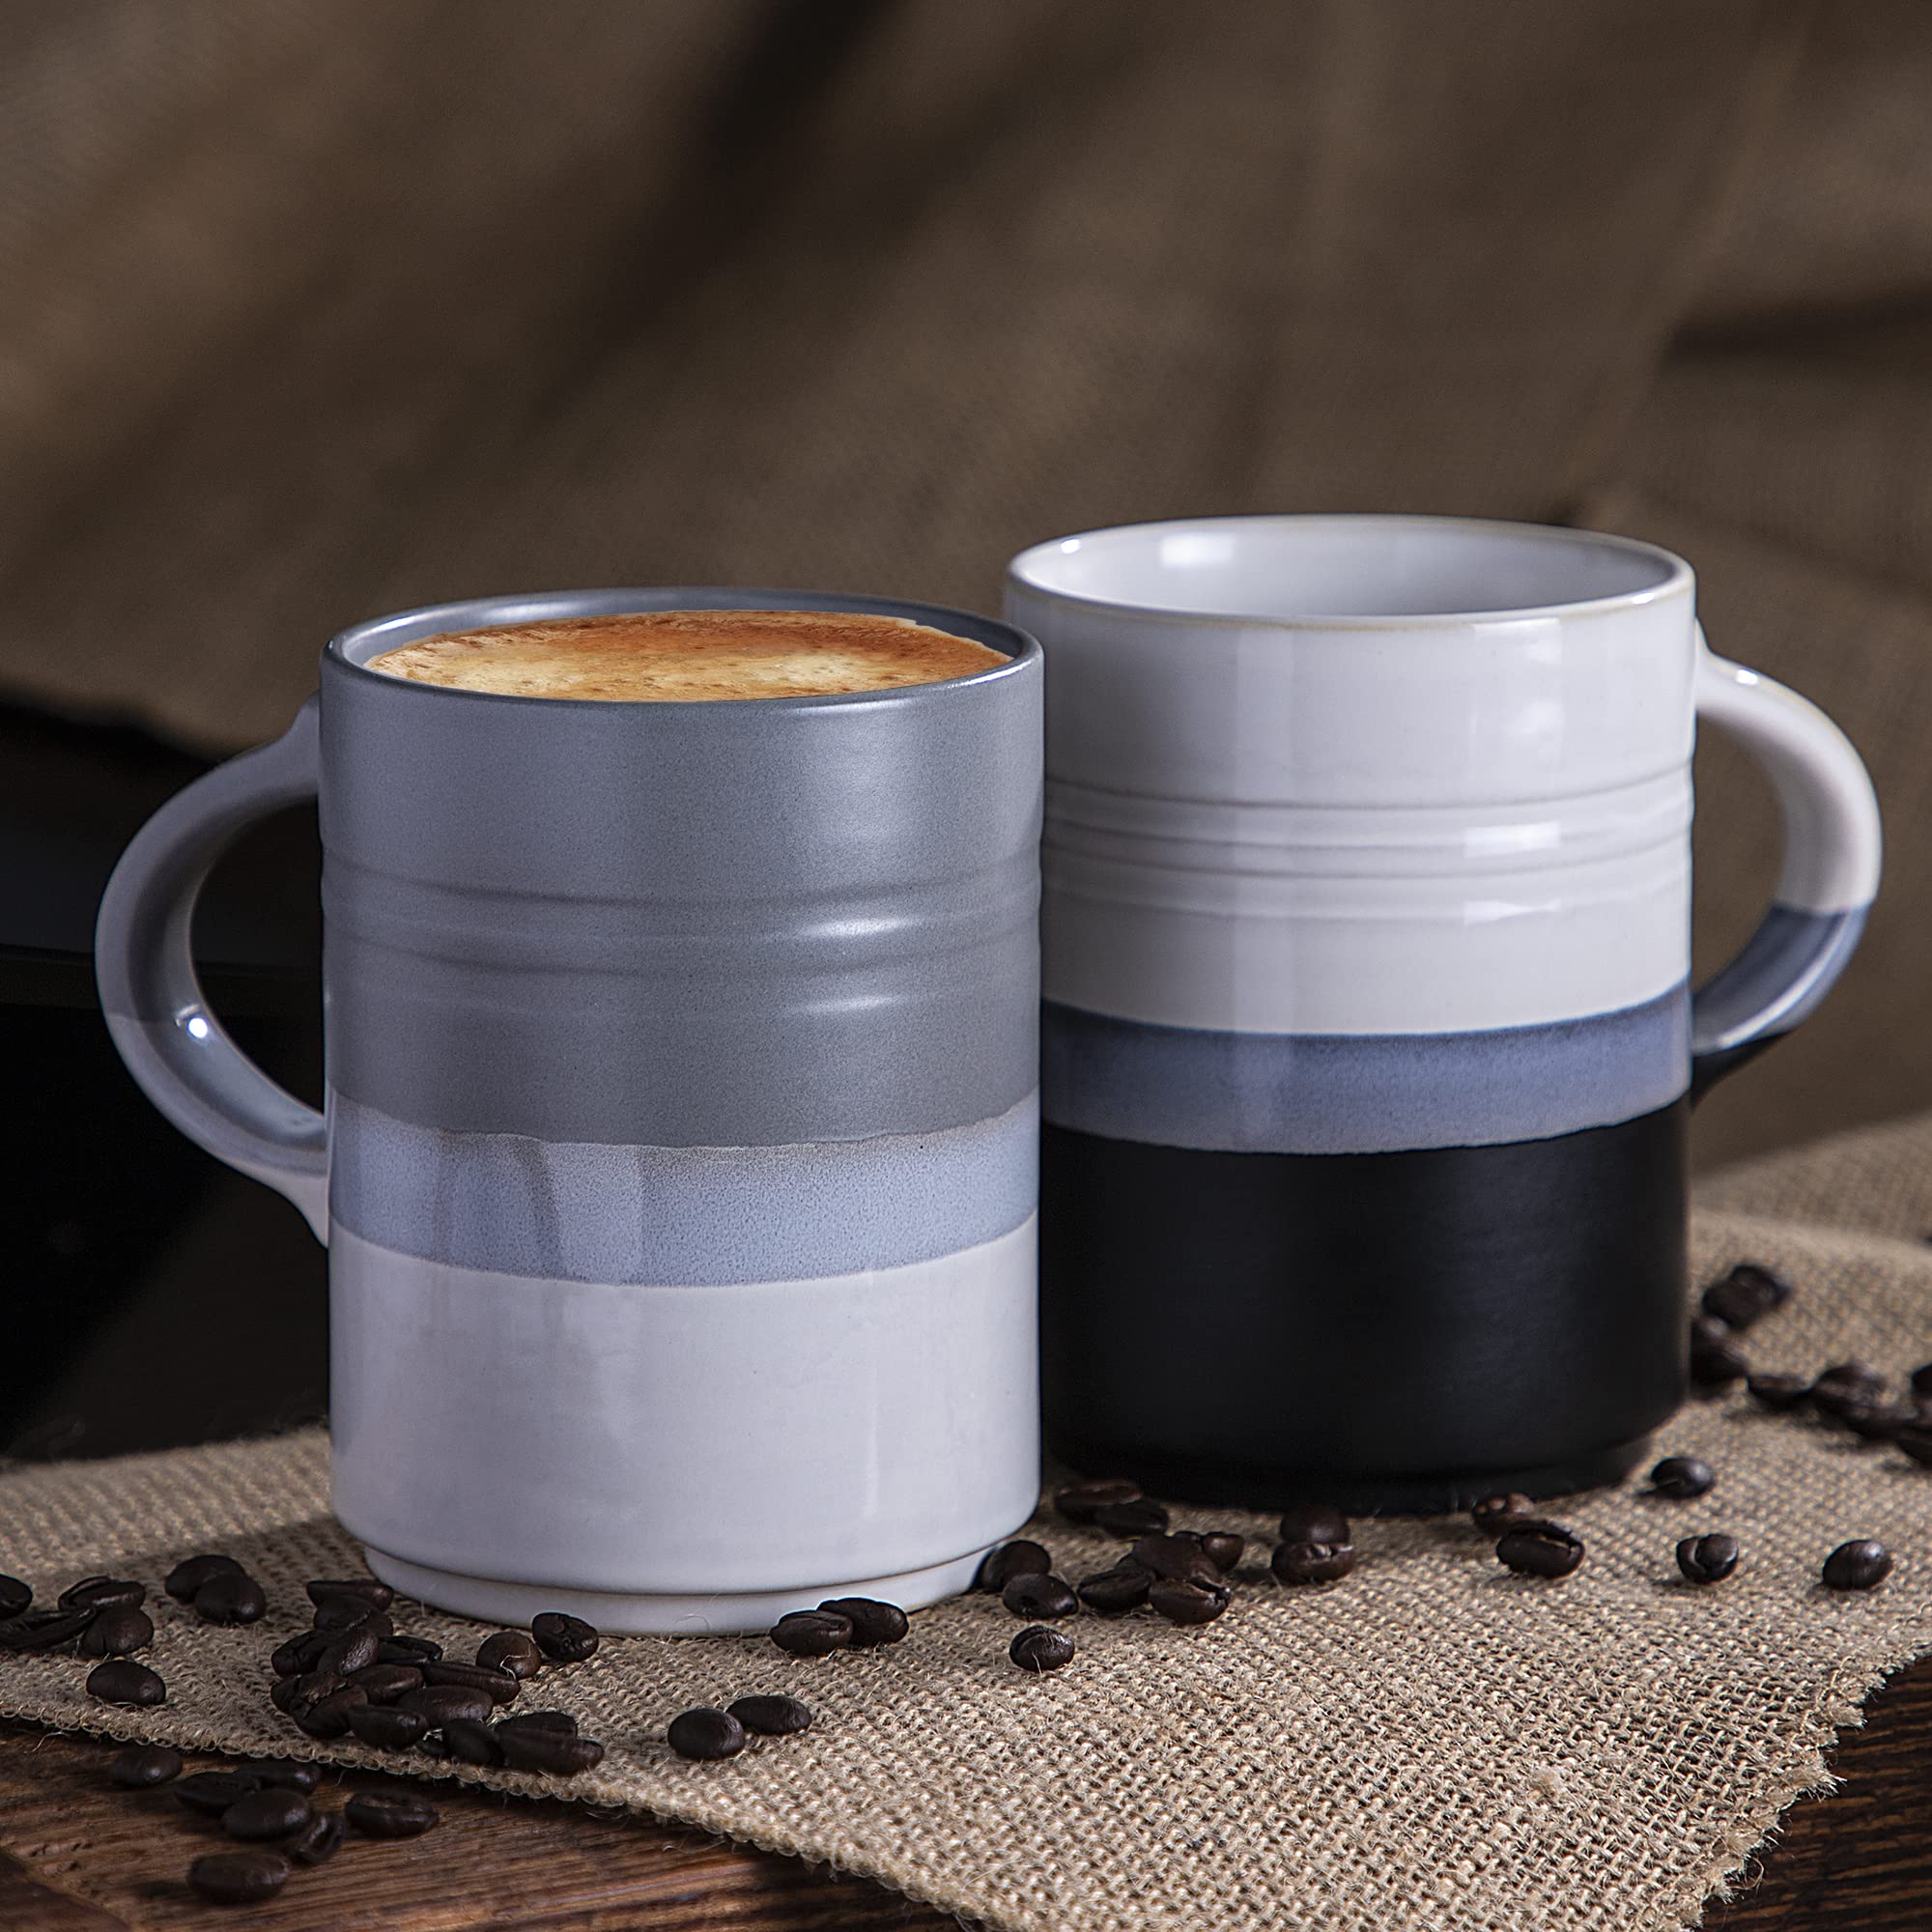 Dwell Studio Set of 2 Stoneware Coffee Mugs- Ombre Printed Coffee Cups, Mugs for Tea, Latte, and Hot Chocolate, 18 oz, Microwave and Dishwasher Safe (Black and Grey)